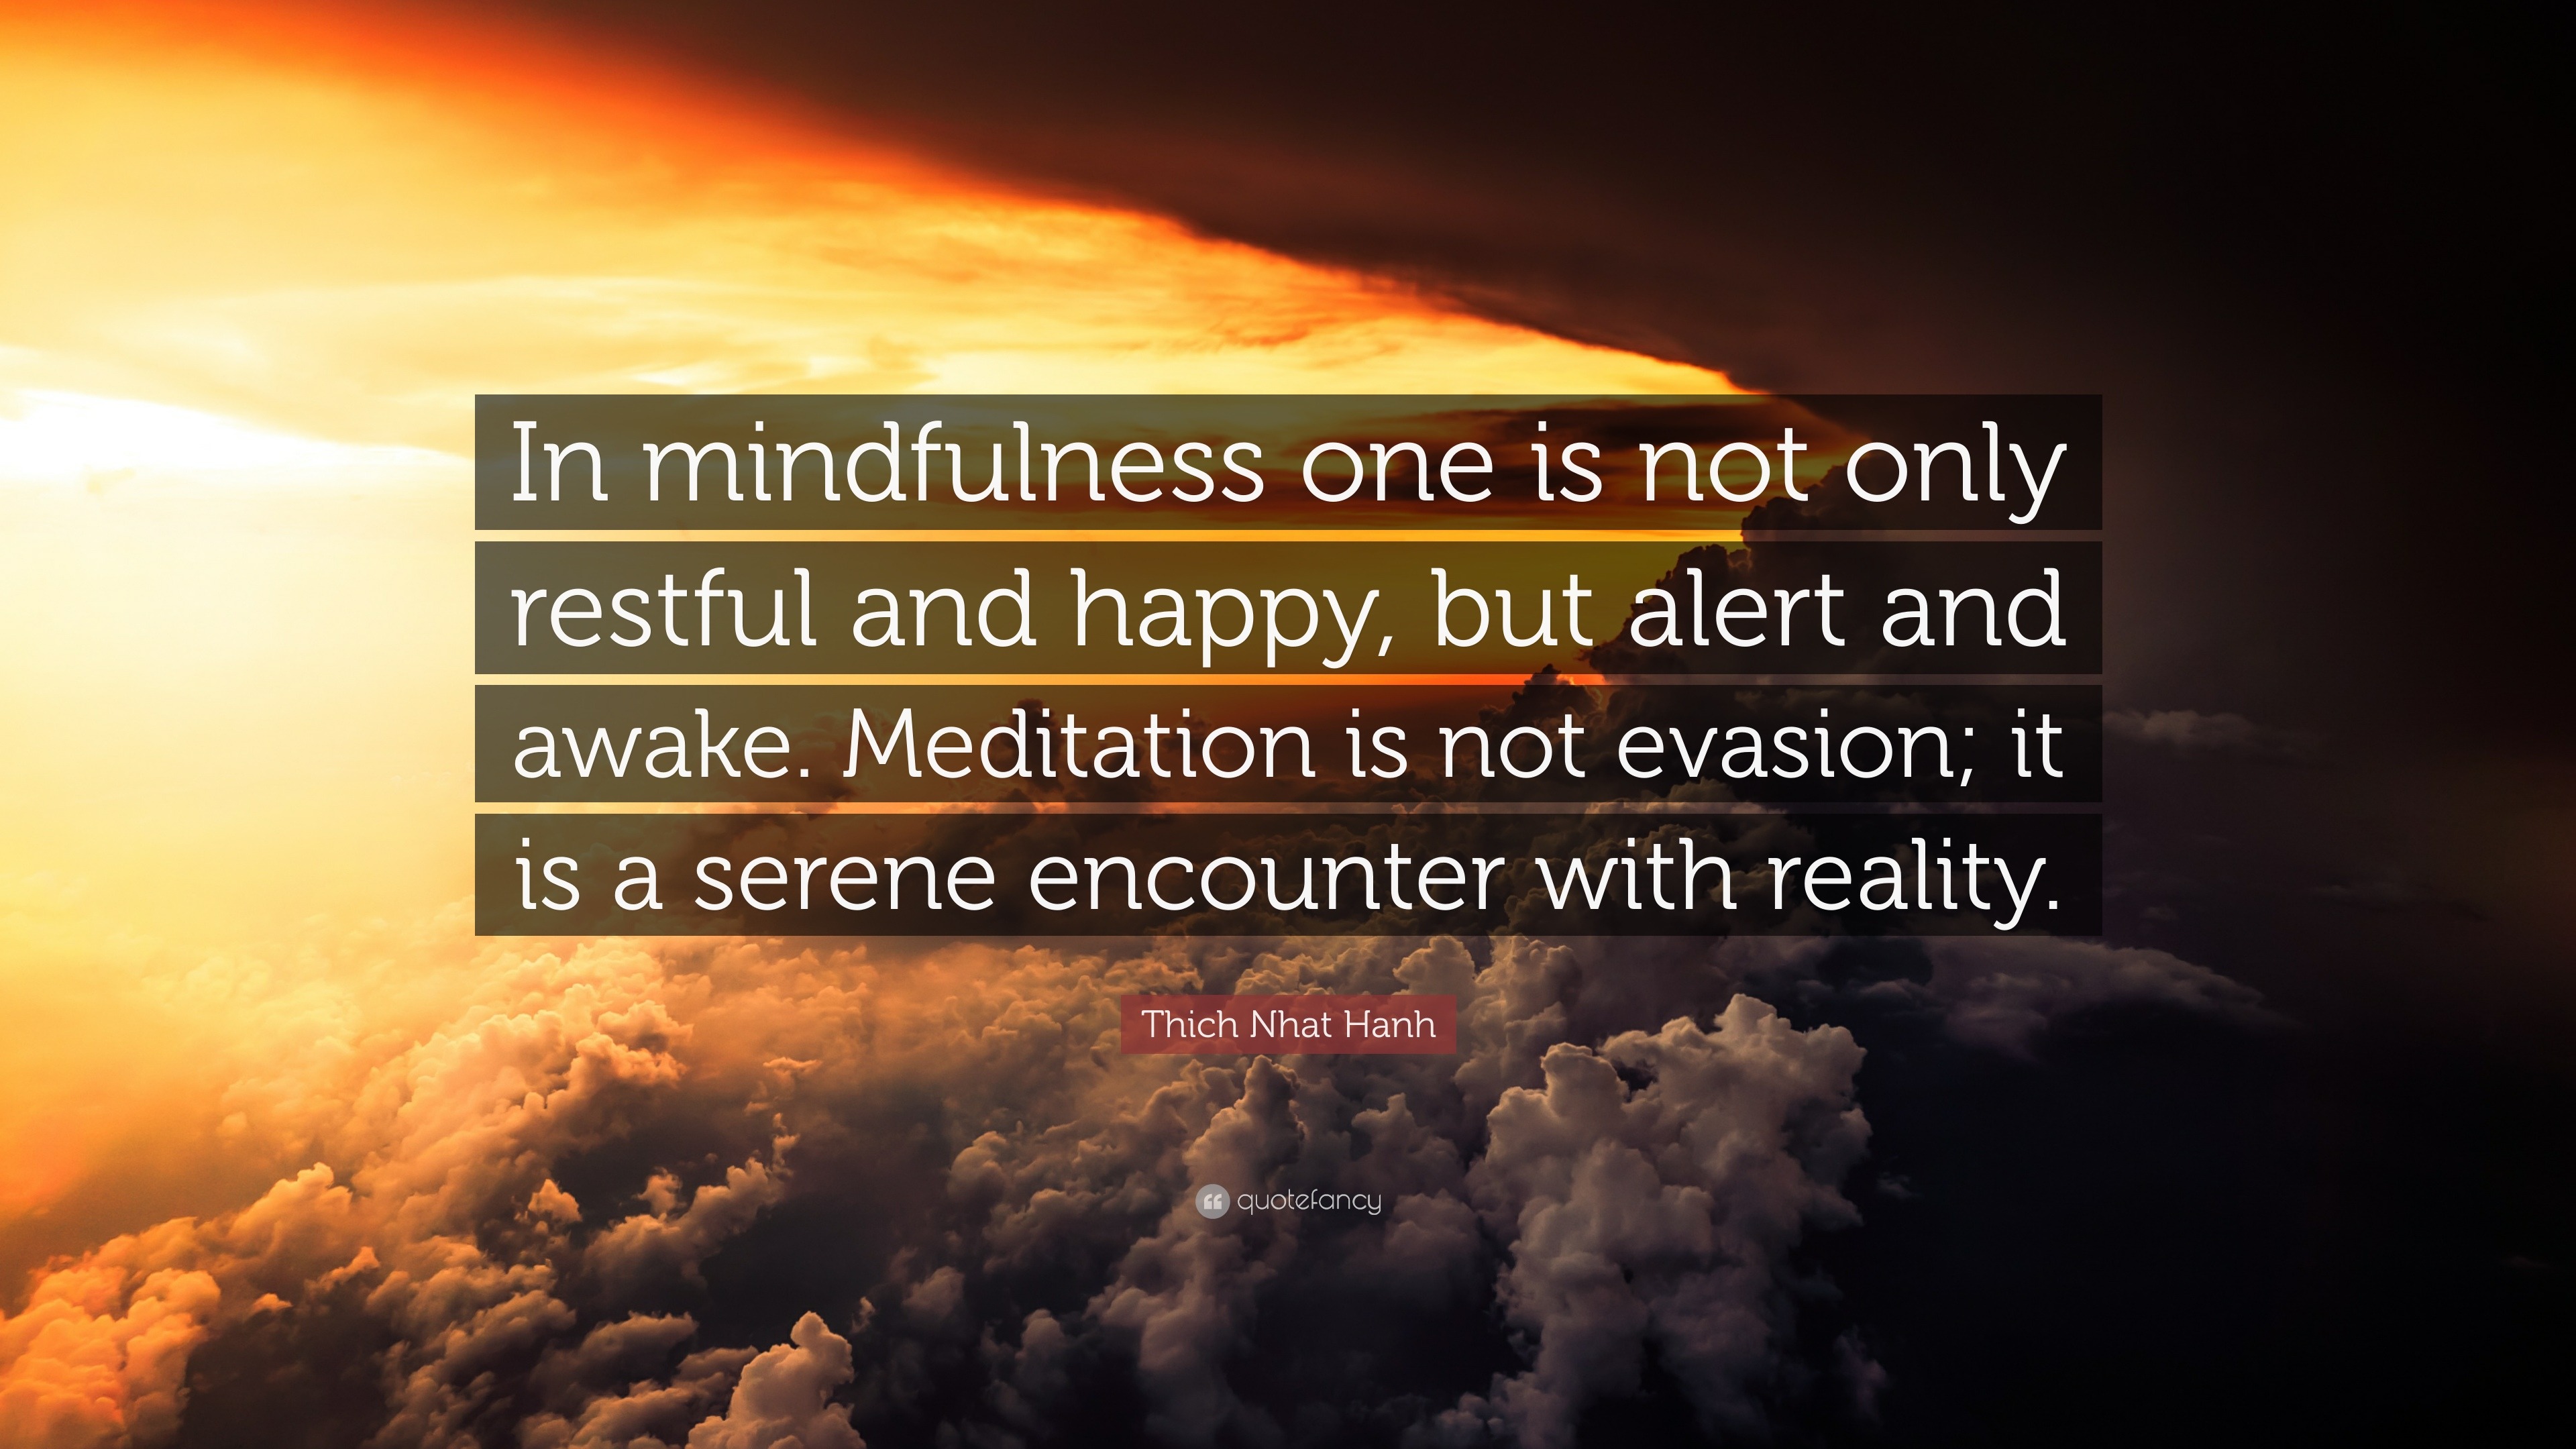 Thich Nhat Hanh Quote: “In mindfulness one is not only restful and ...